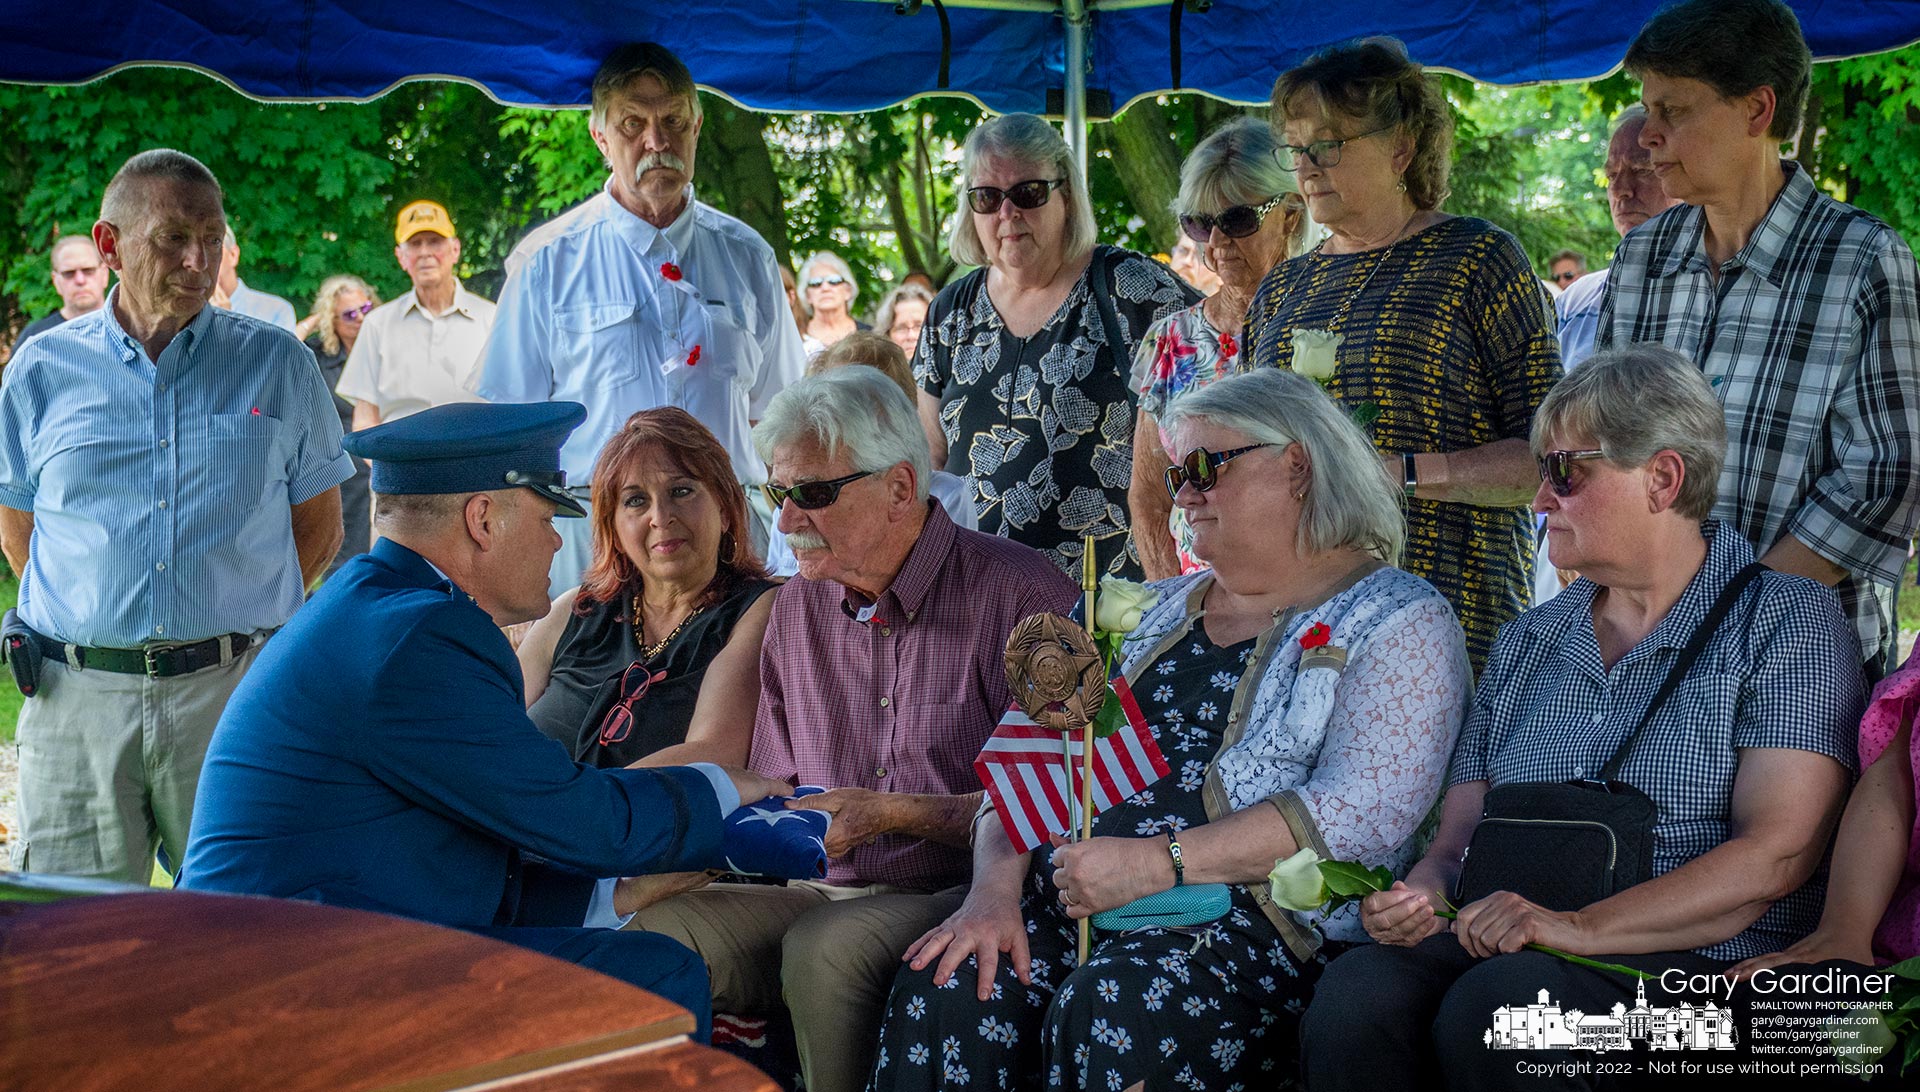 David Lilley, surrounded by family and friends, accepts the flag that covered his brother's casket after a military funeral honoring the Korean War soldier whose remains were recently identified after 71 years. My Final Photo for June 14, 2022.